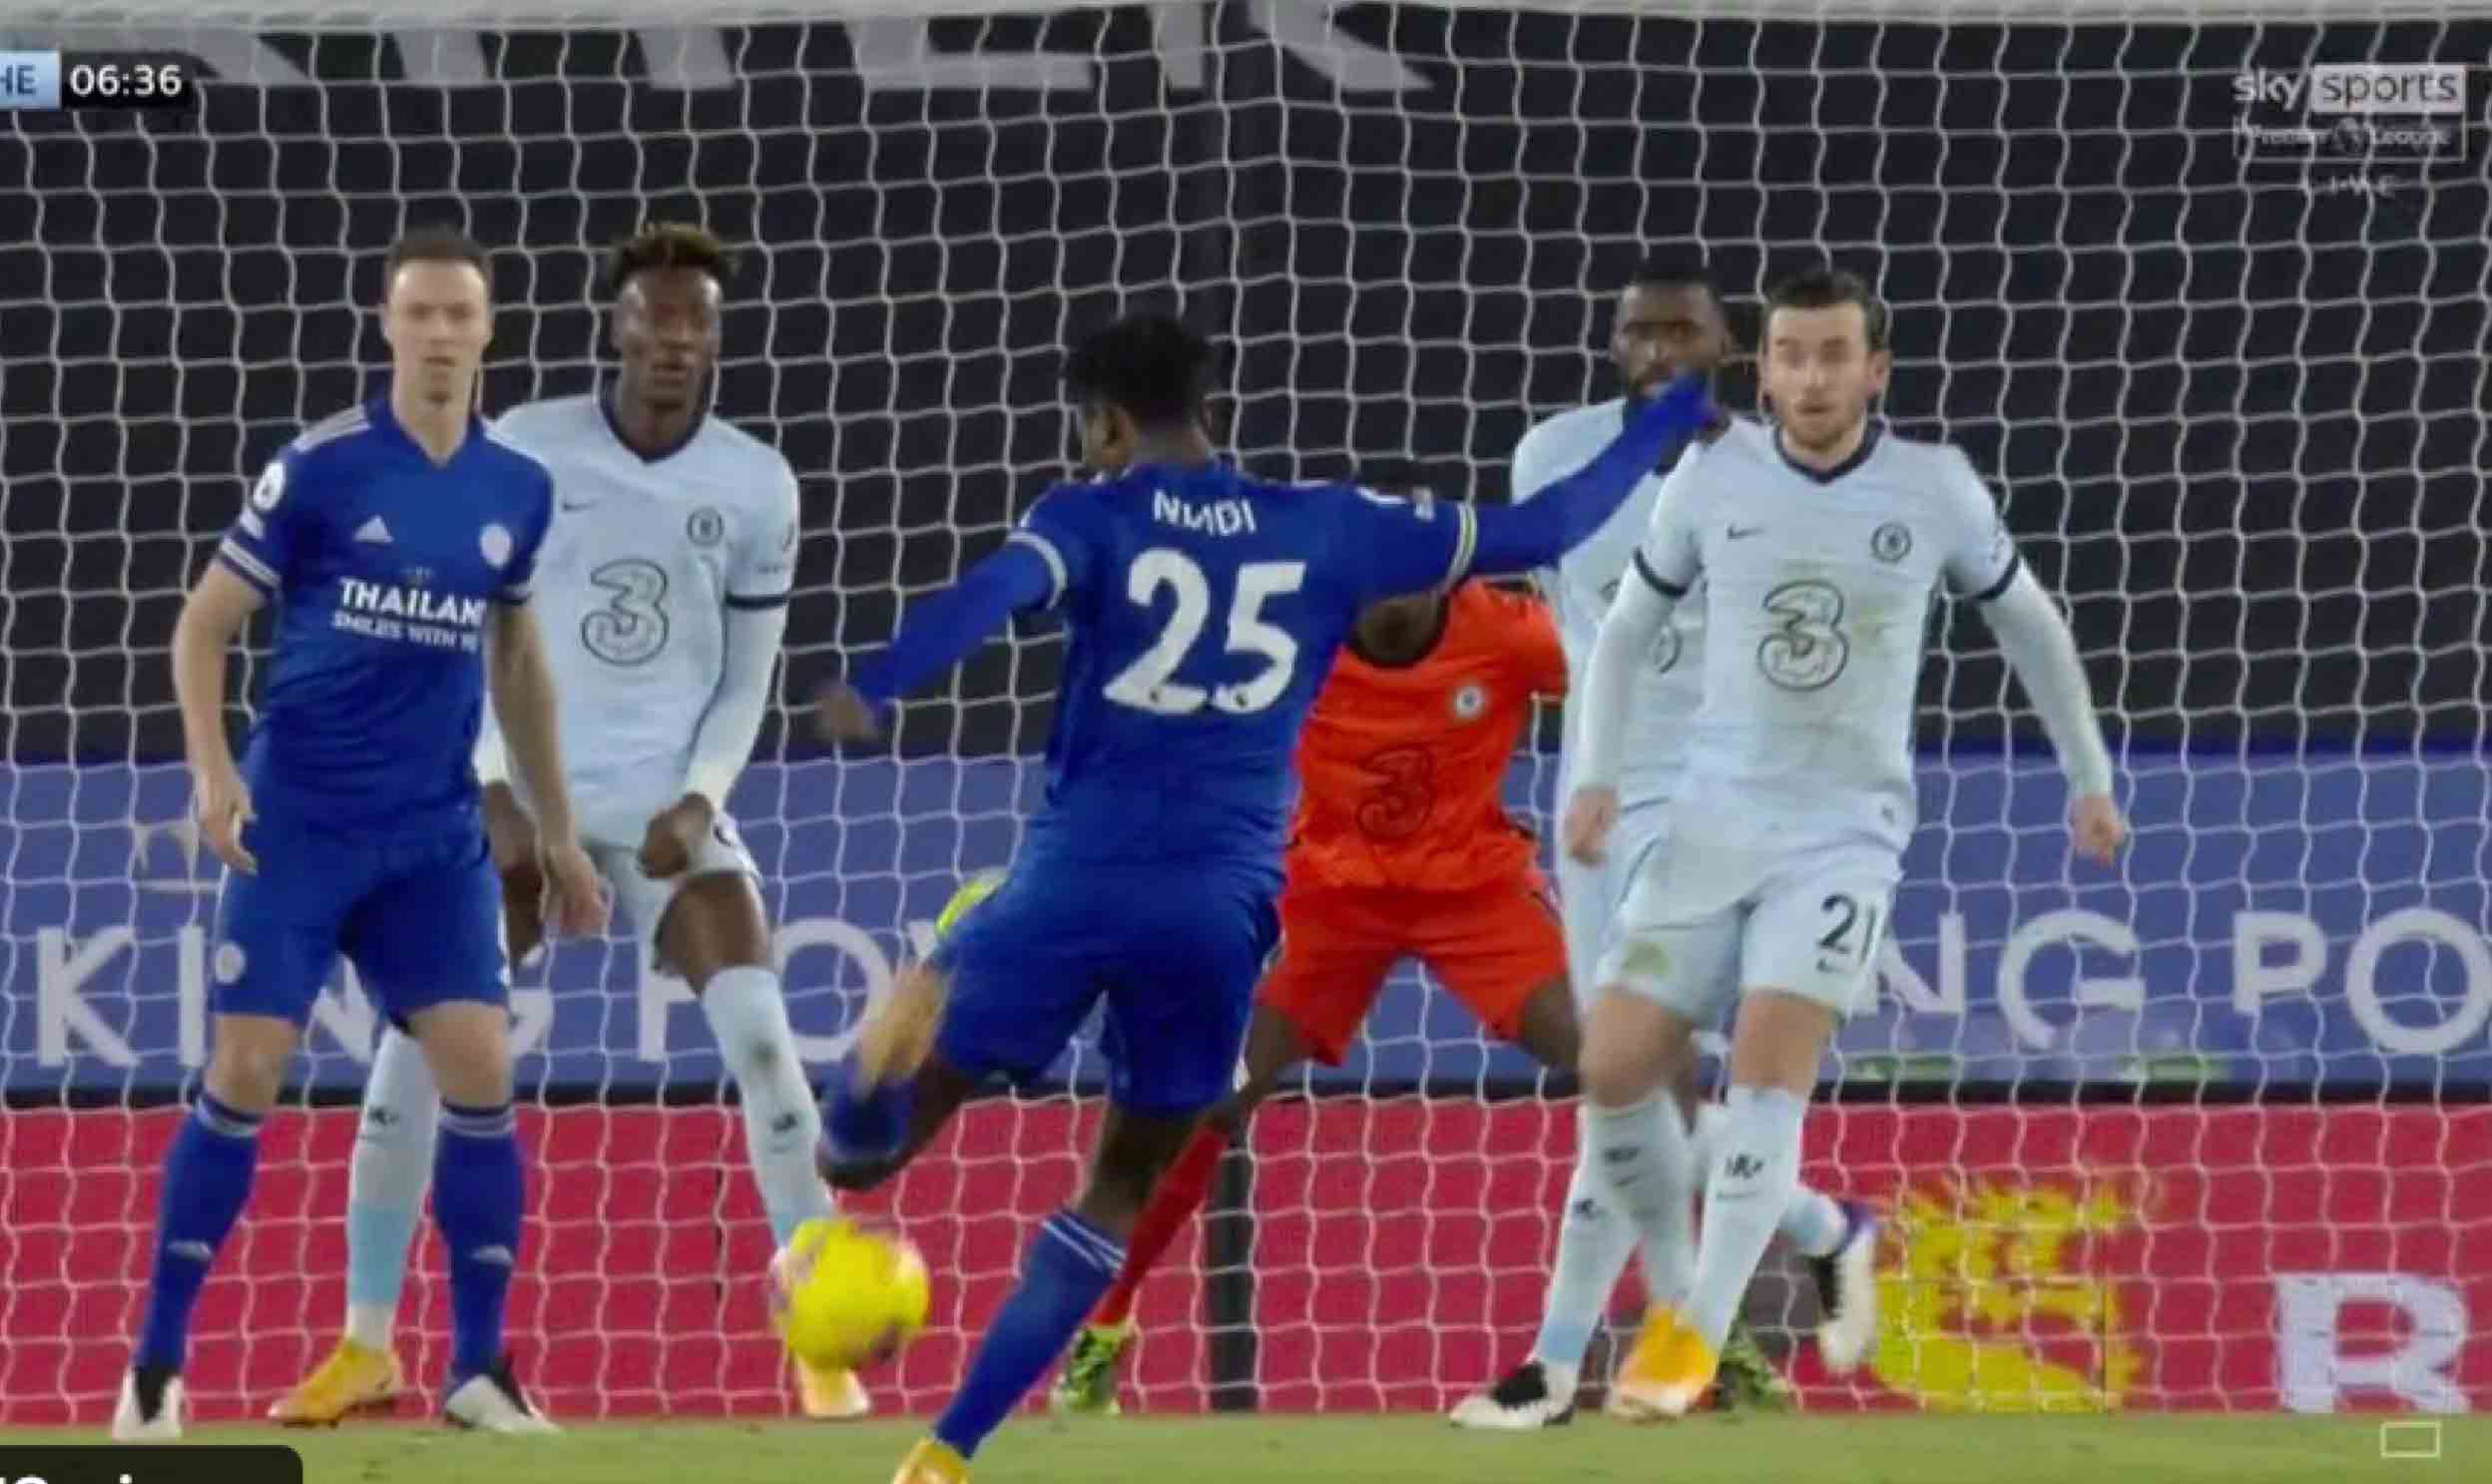 Video: Wilfred Ndidi smashes Leicester City ahead with half-volley